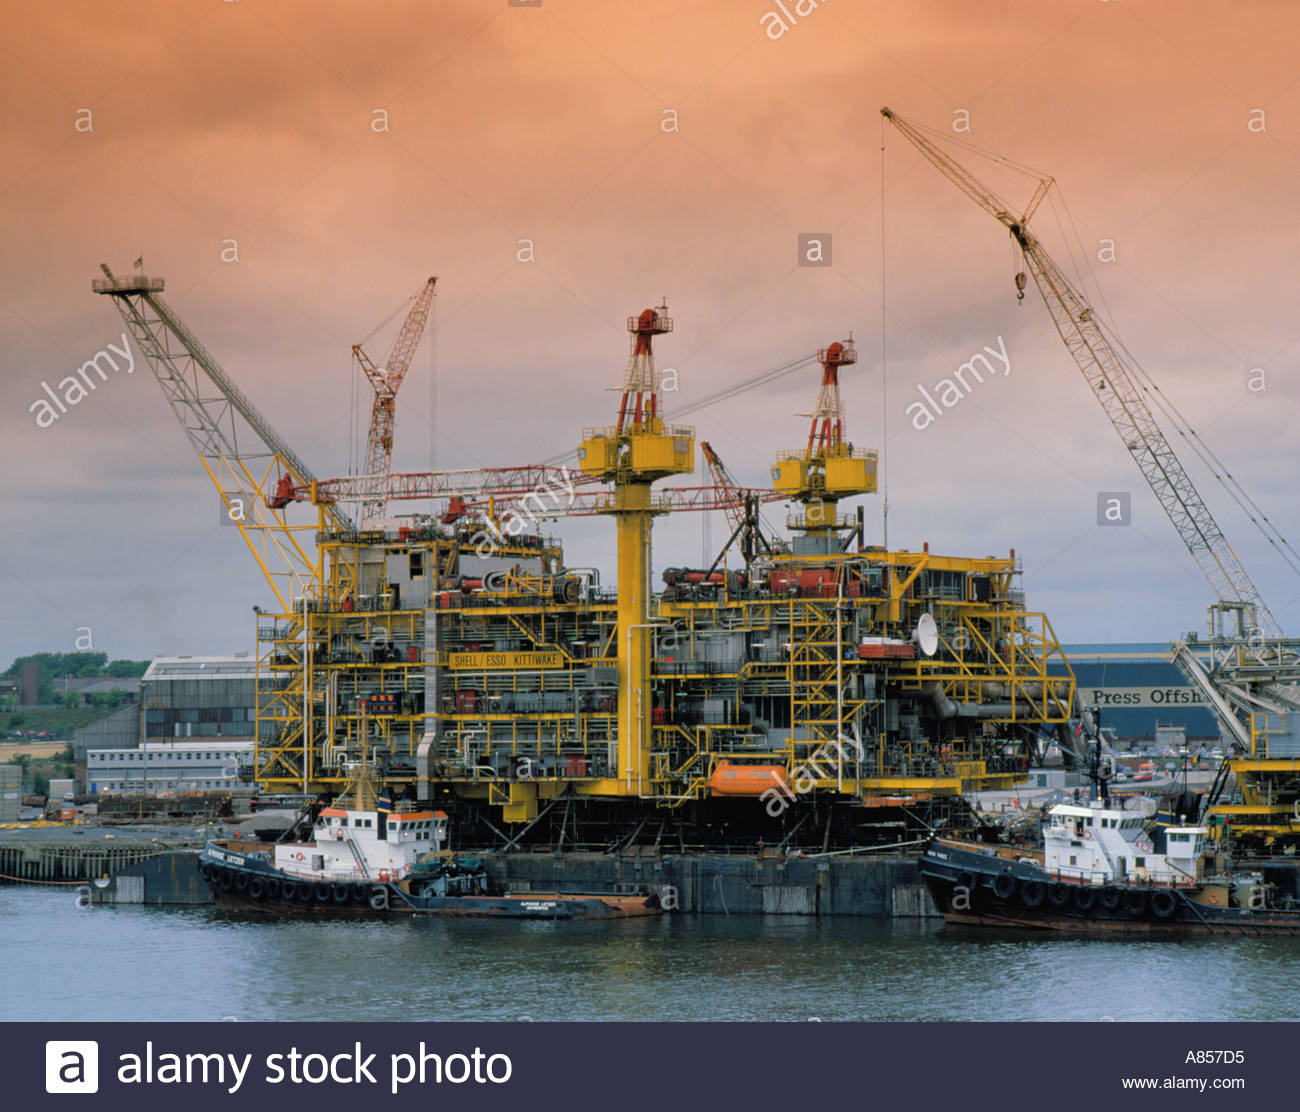 North Sea Oil Rig Kittiwake On A Barge Press Offshores Hadrian